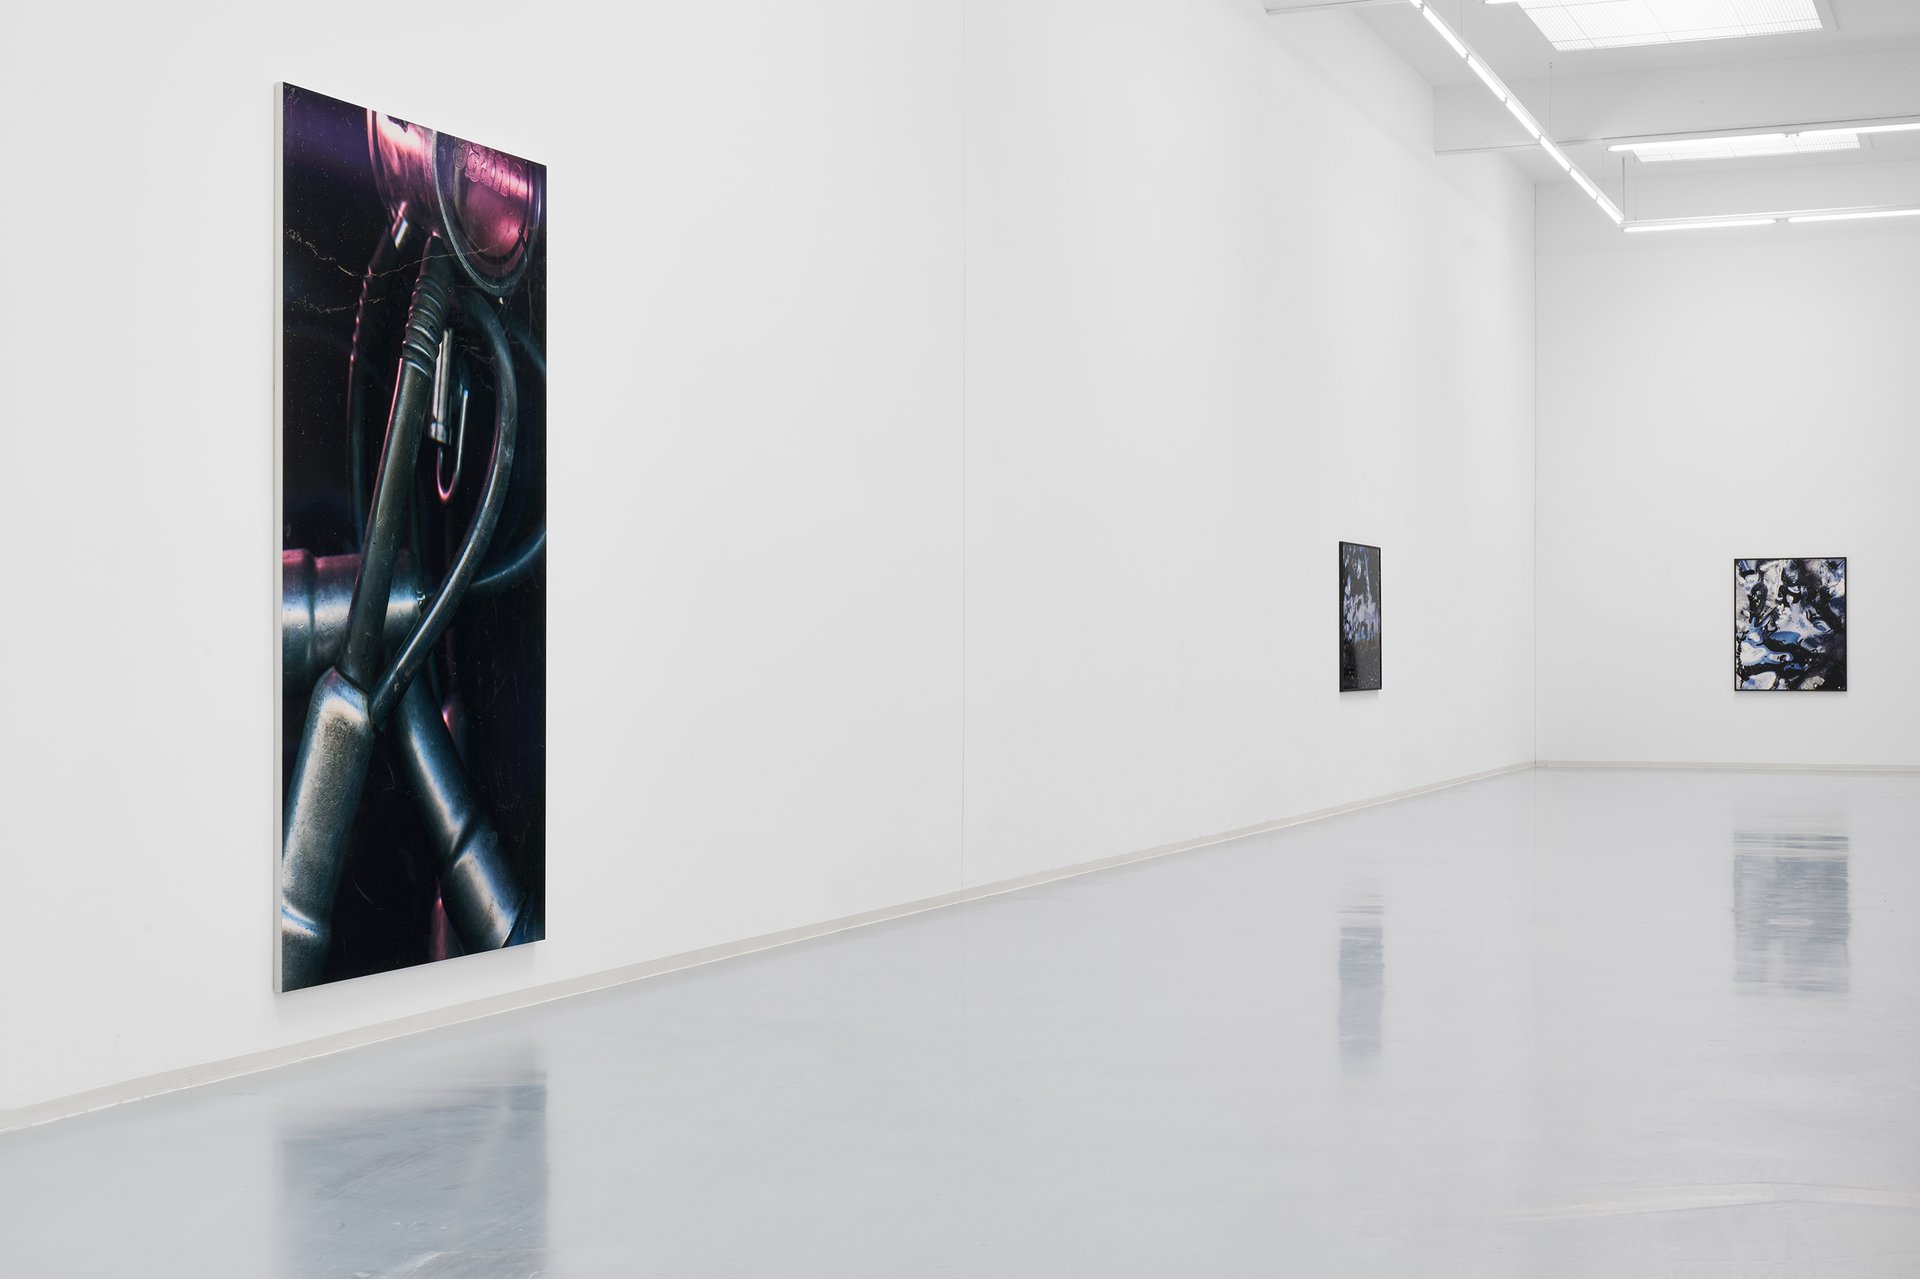 Lucie Stahl, Surge and Burrows (1,2), installation view, Lucie Stahl: Seven Sisters, Bonner Kunstverein, 2022. Courtesy the artist, Cabinet Gallery, London, dépendance, Brussels, Fitzpatrick Gallery, Paris and Los Angeles, and Galerie Meyer Kainer, Vienna. Photo: Mareike Tocha.